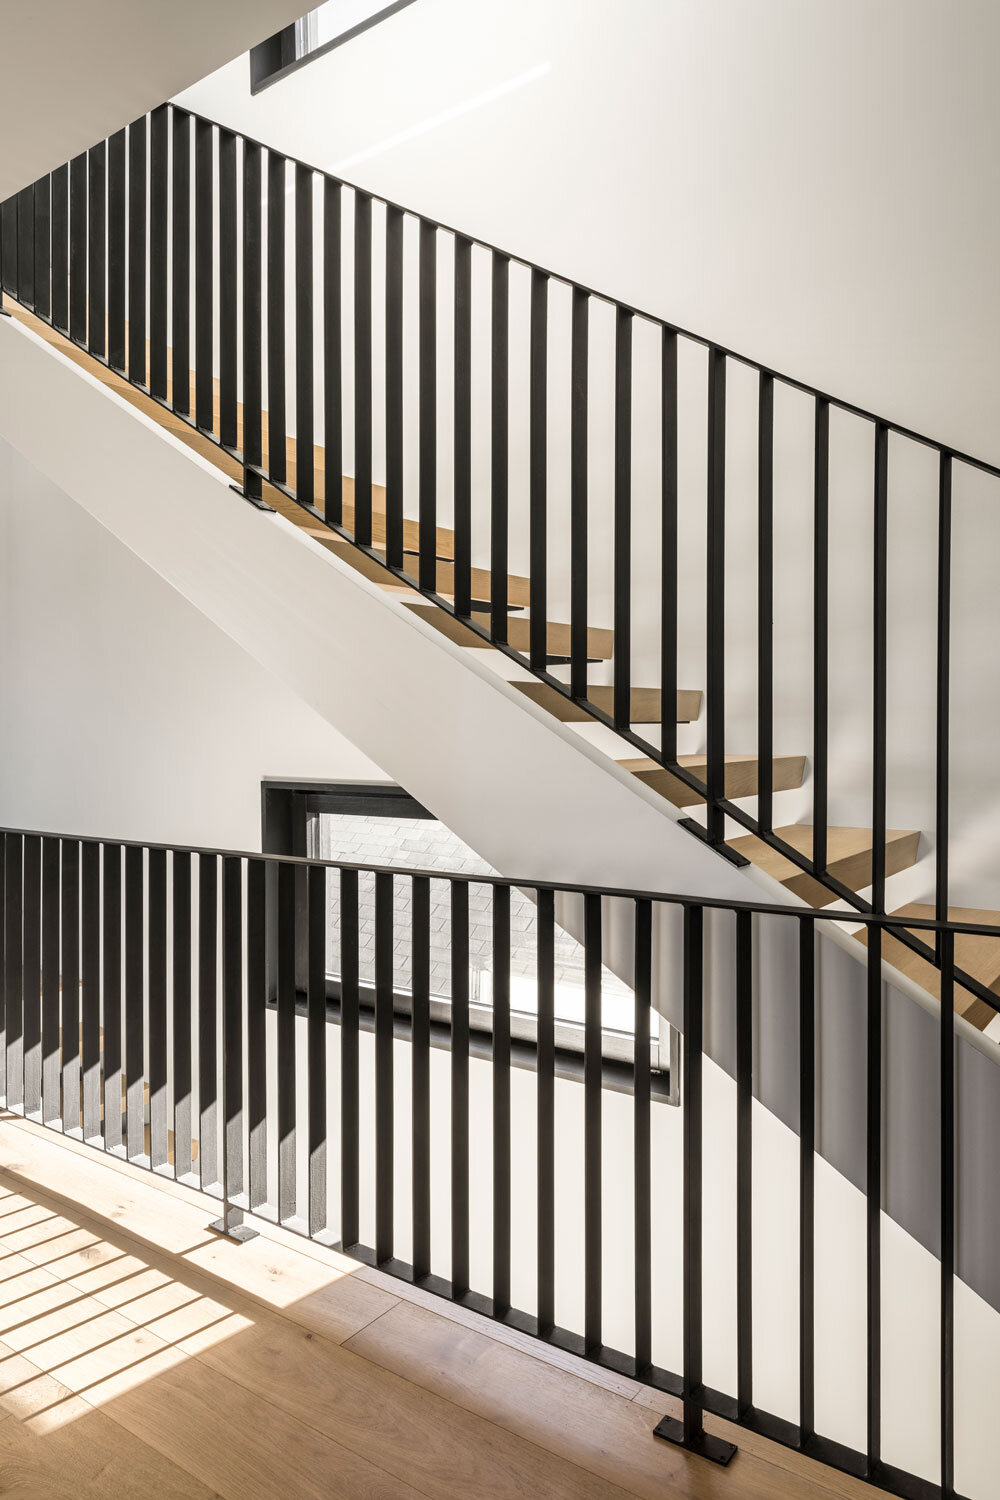 The open-tread oak staircase and steel banisters create clean, repeating lines.